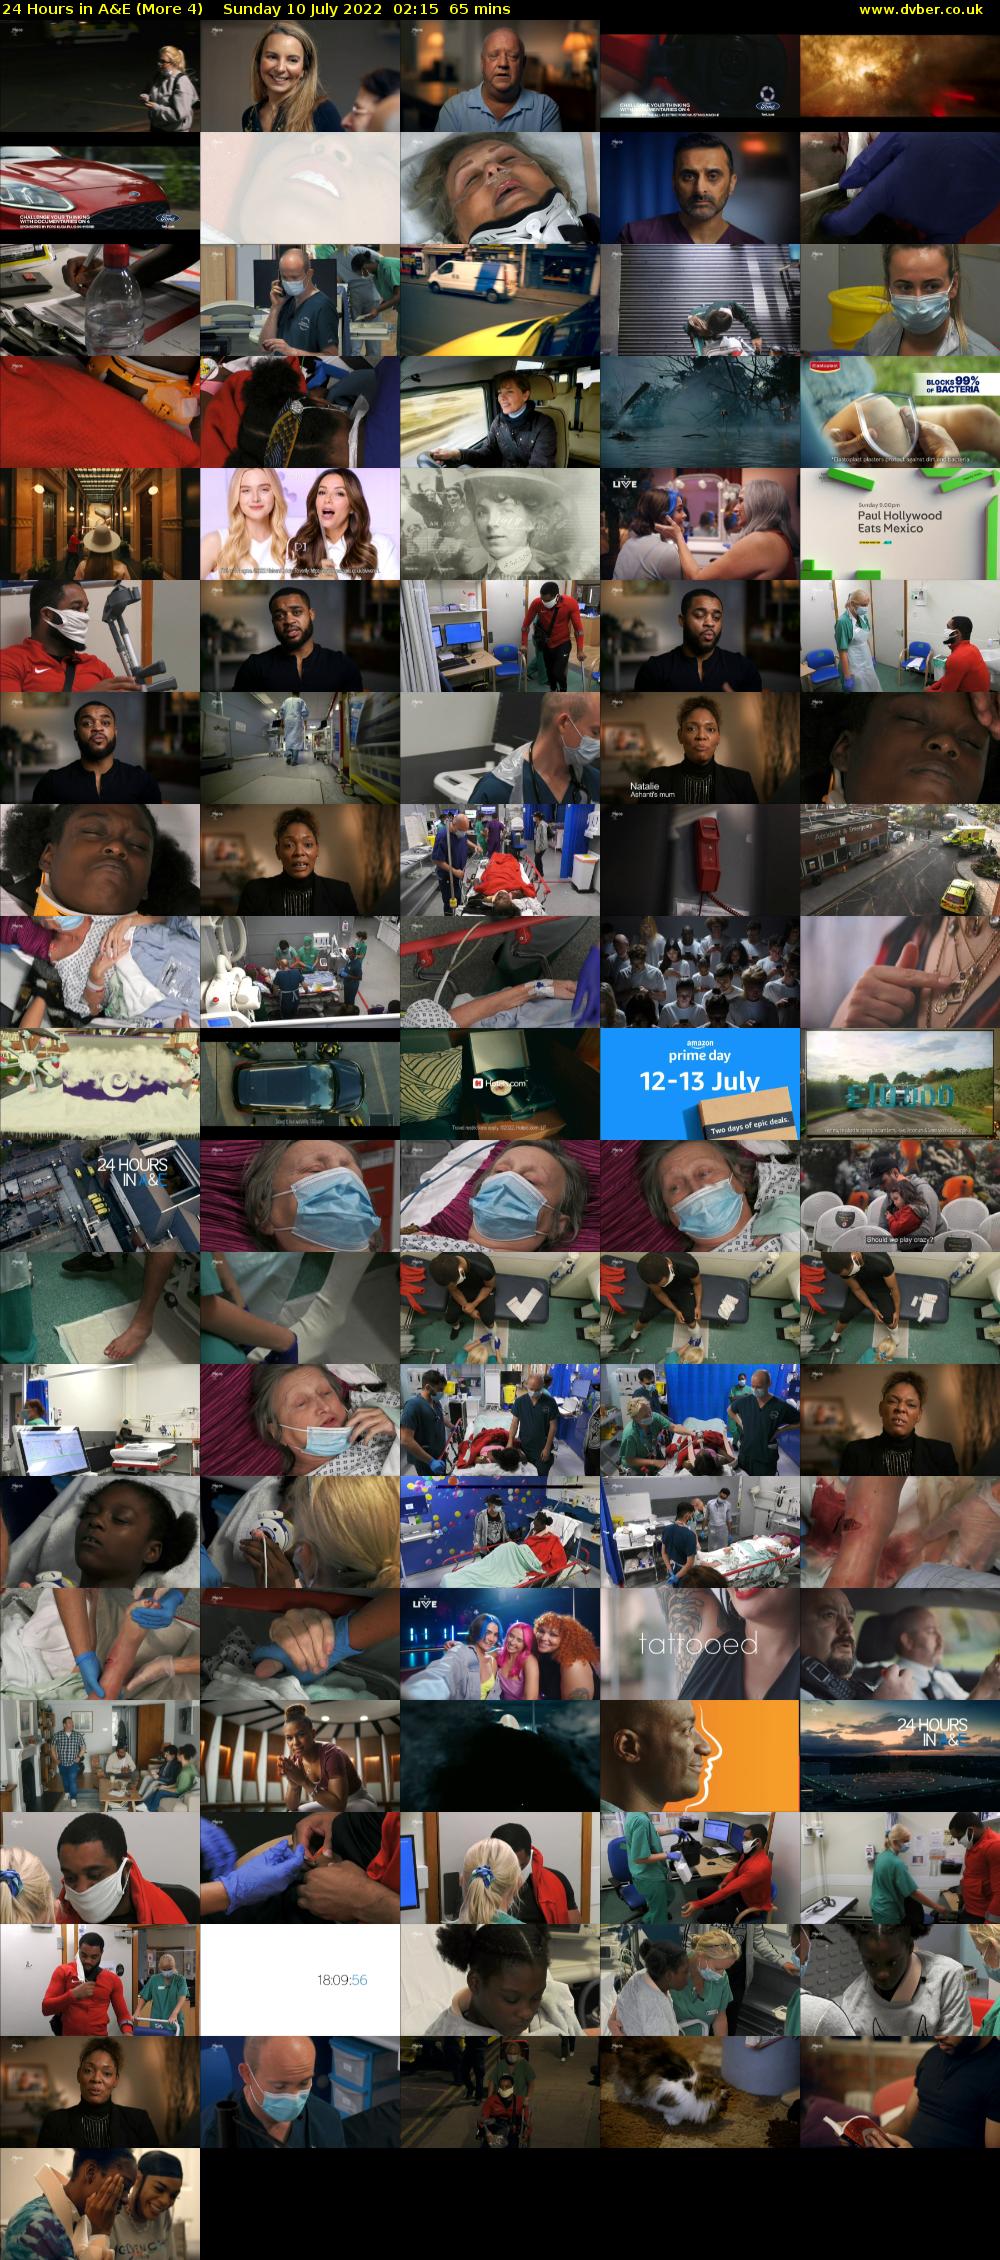 24 Hours in A&E (More 4) Sunday 10 July 2022 02:15 - 03:20